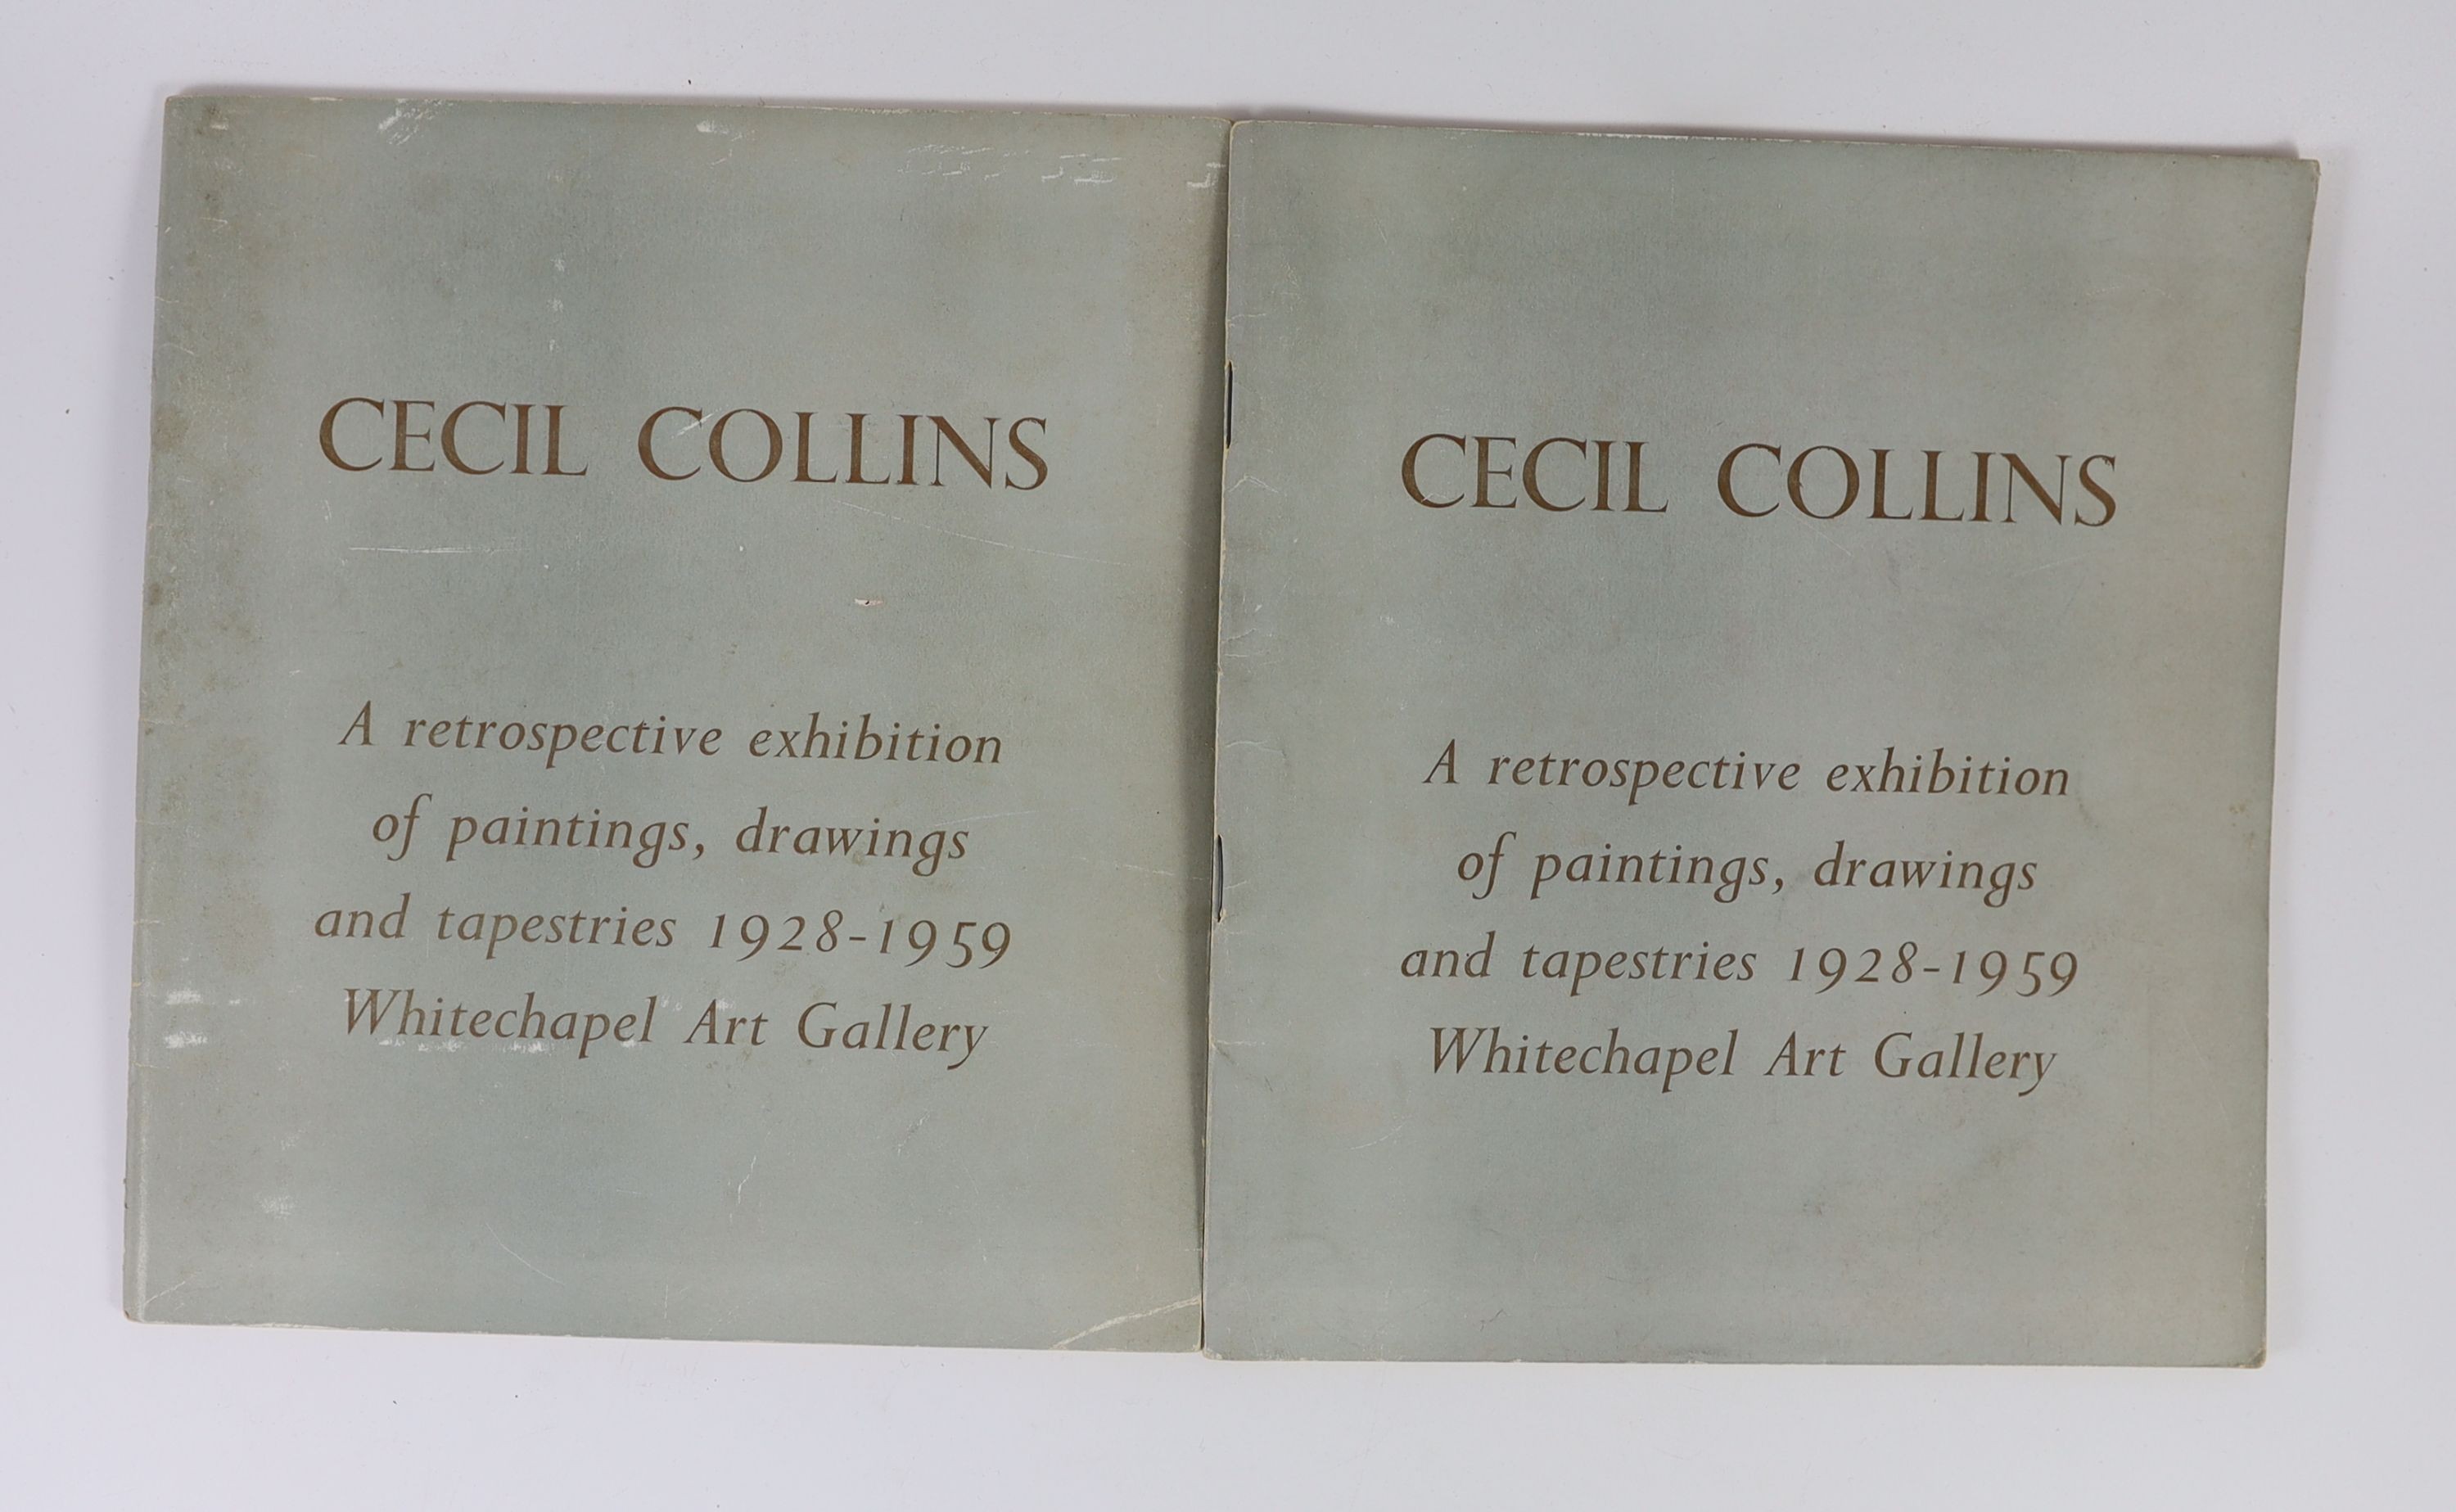 Collins, Cecil - In the Solitude of this Land. 1st and limited ed. 1 of 100. Complete with autolithograph frontispiece signed in pencil by the author. Printed paper wrappers. 8vo. Golgonooza Press, Ipswich, 1981; Morphet